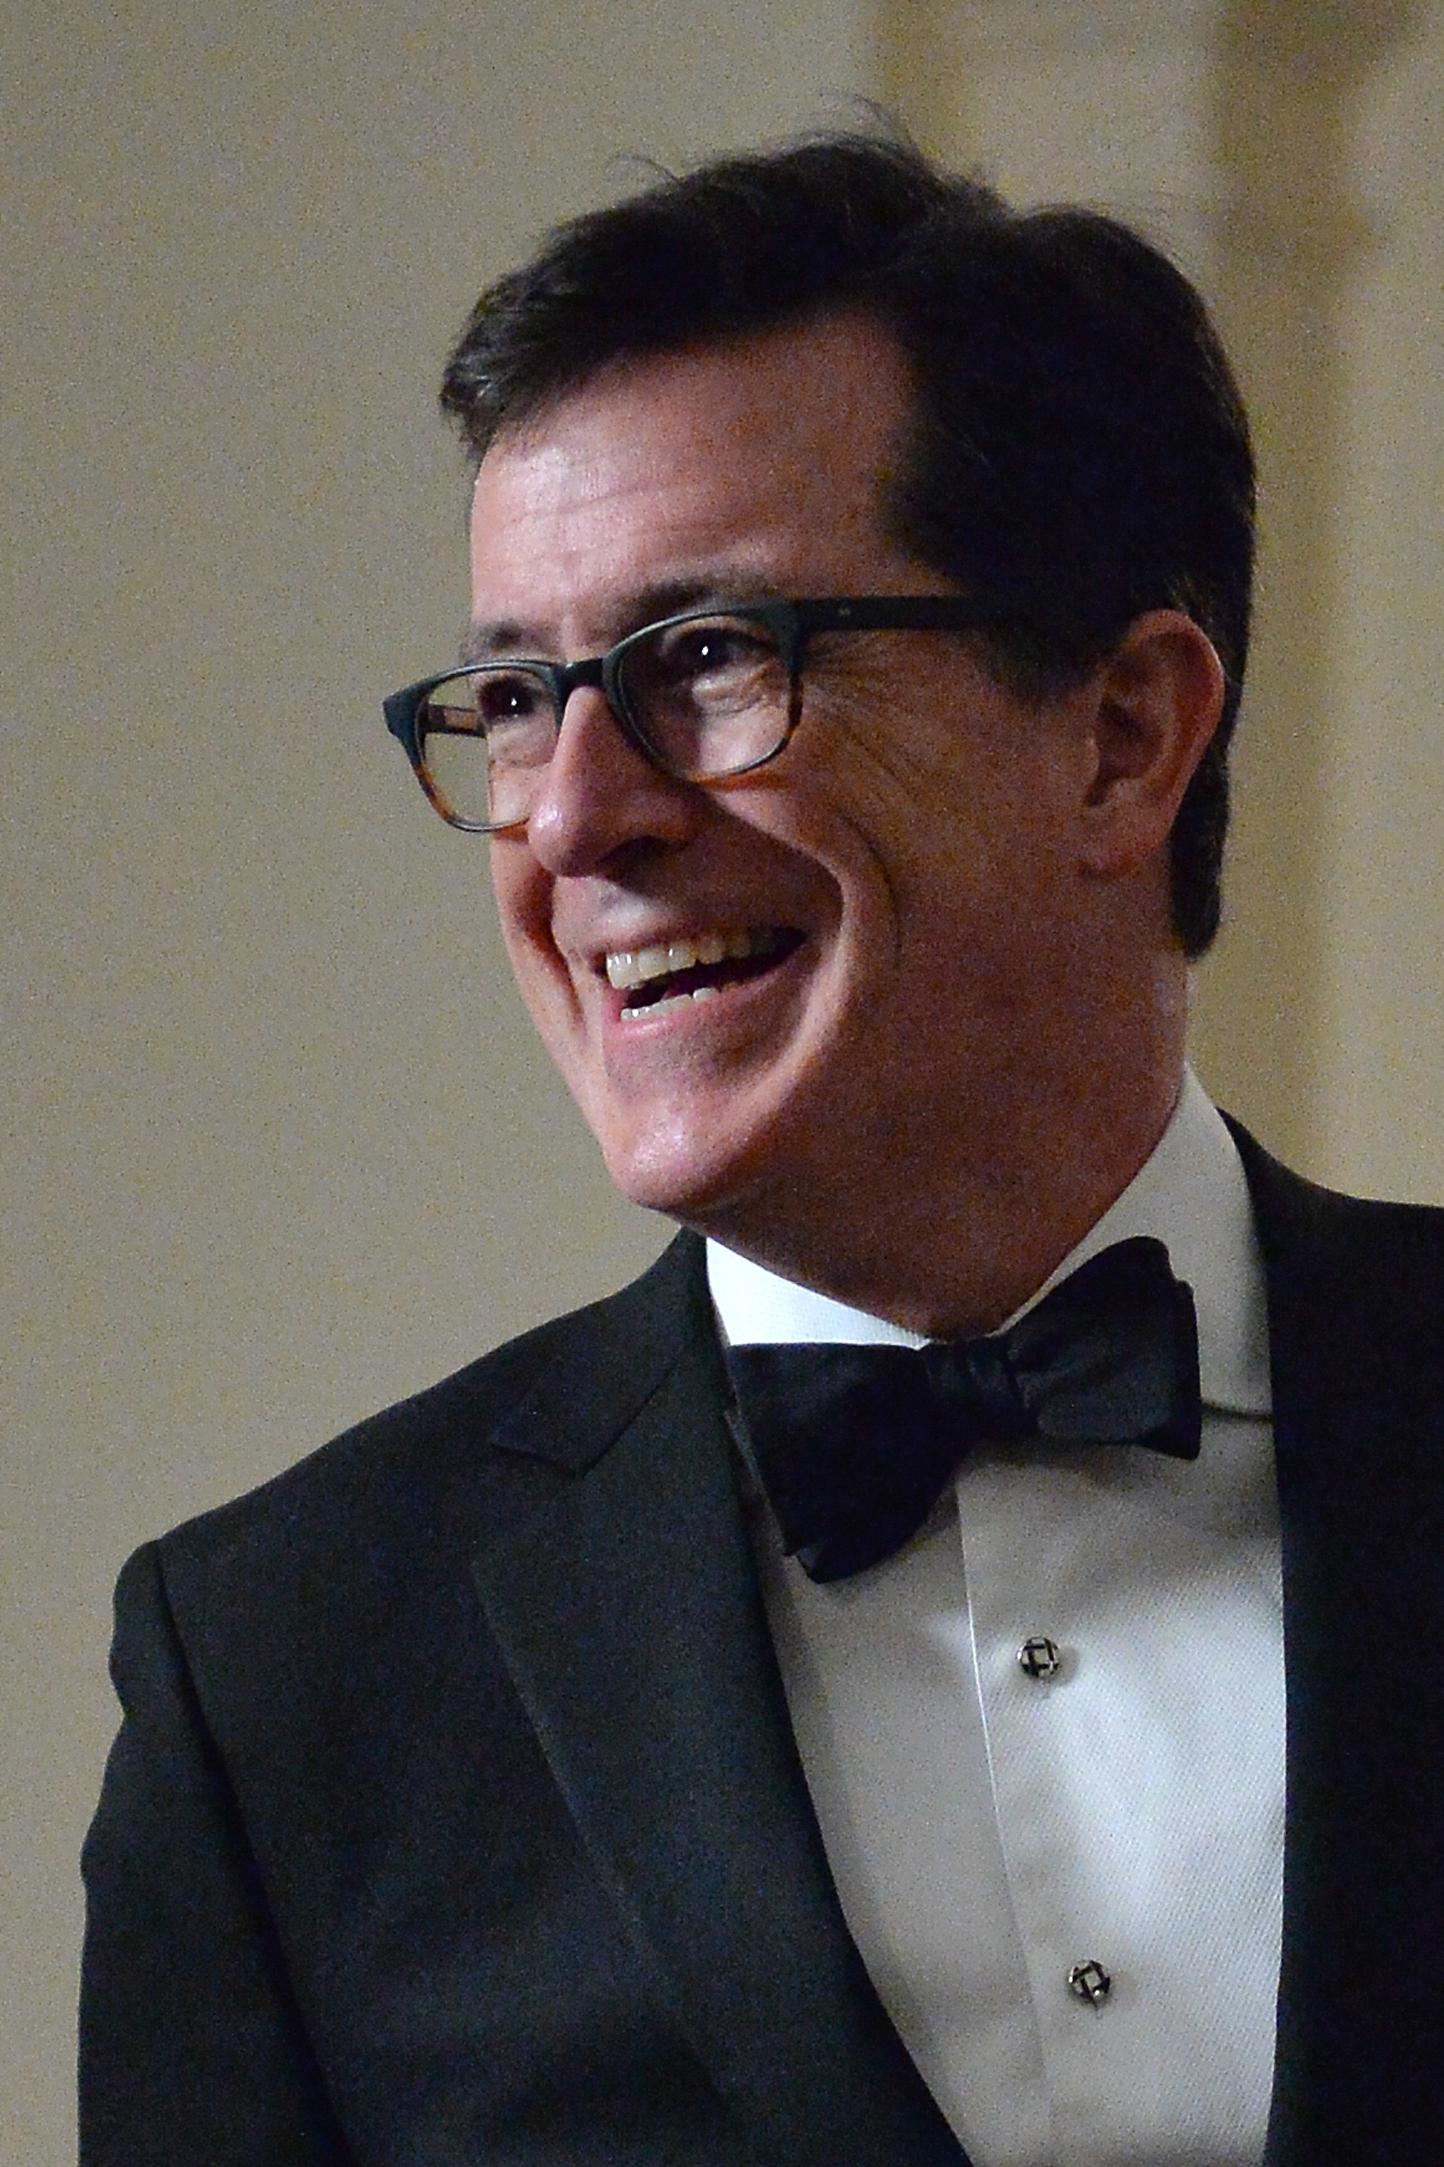 Stephen Colbert, comedian Because of how his humor works, the audience finds meaning through sustained inference, which is a lot more fun than it sounds.  —cartoonist Garry Trudeau